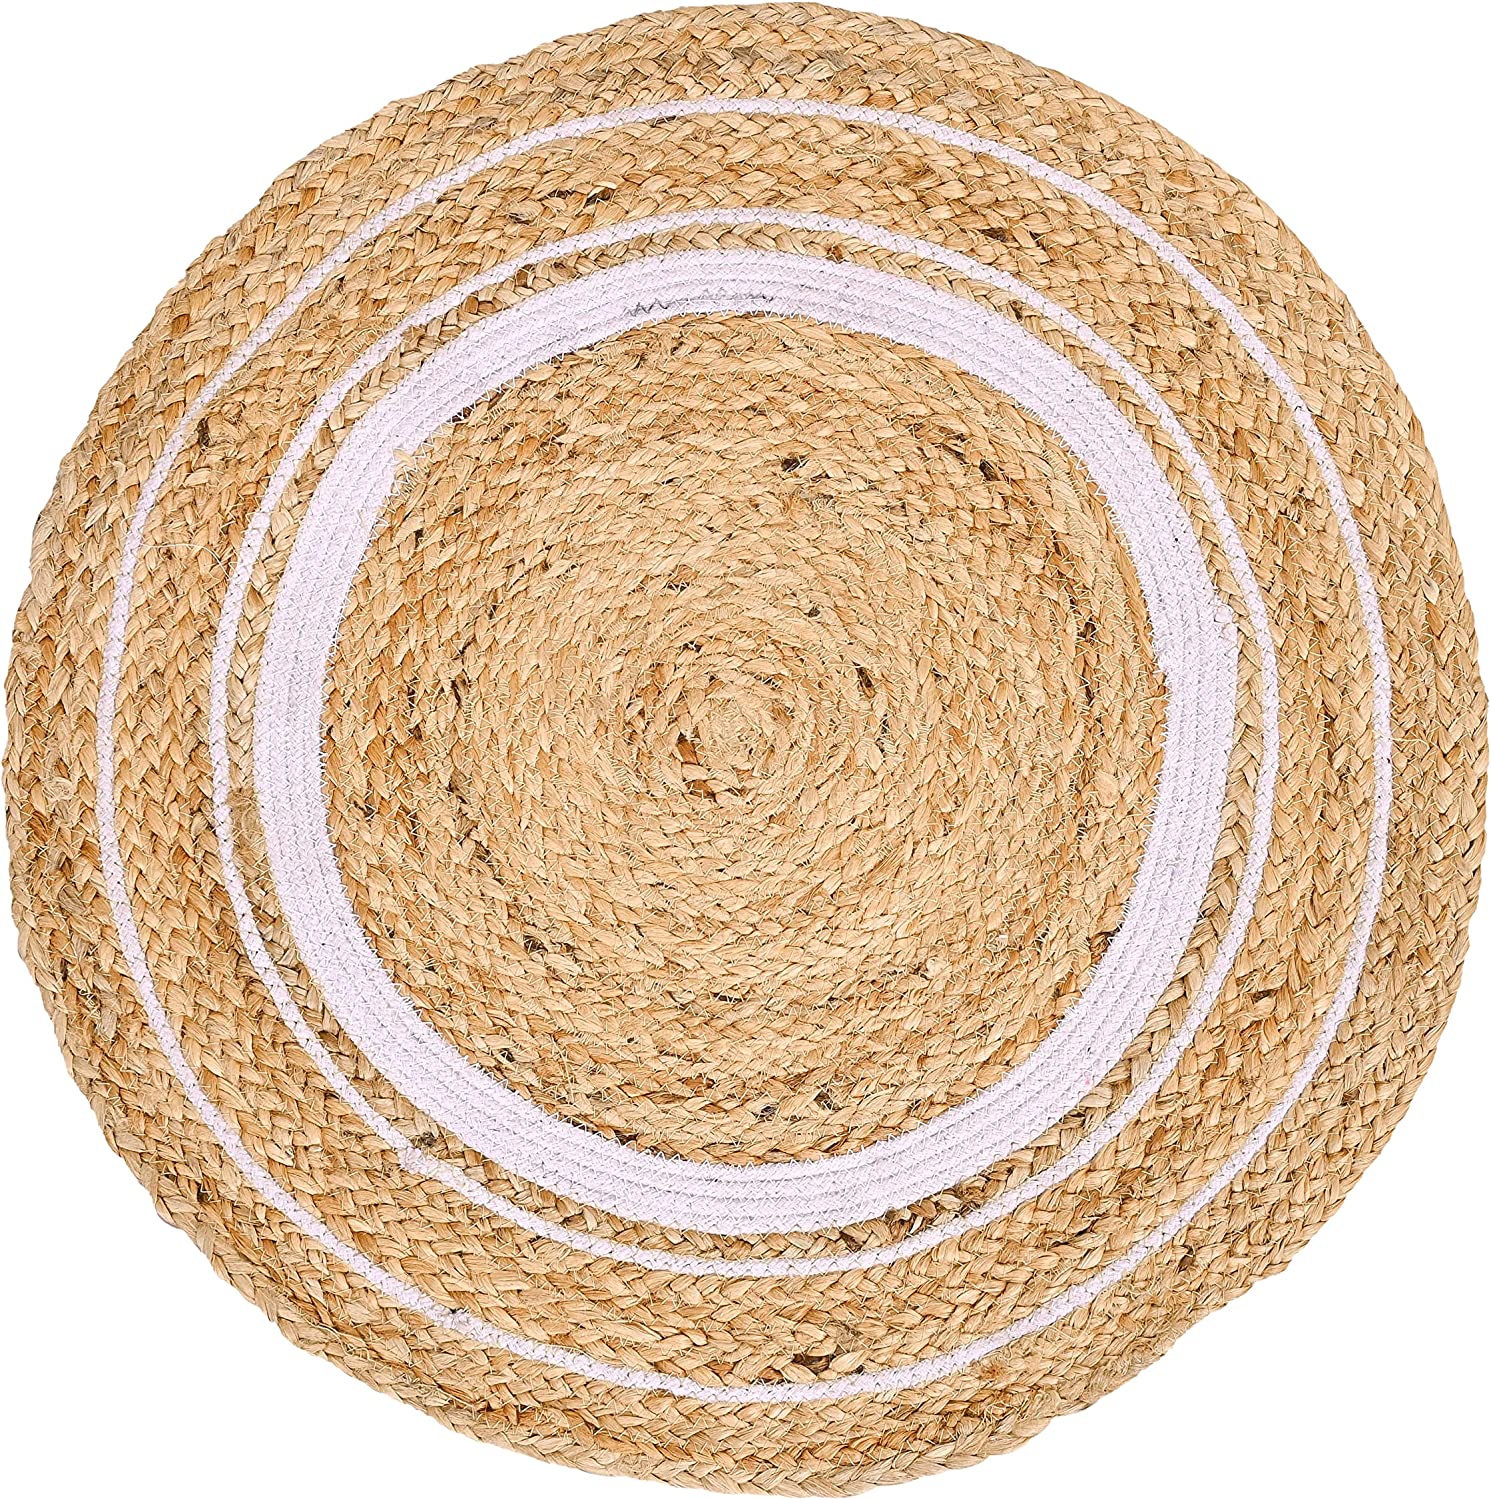 Circular Bliss: Elevate Your Yoga with Round Mats